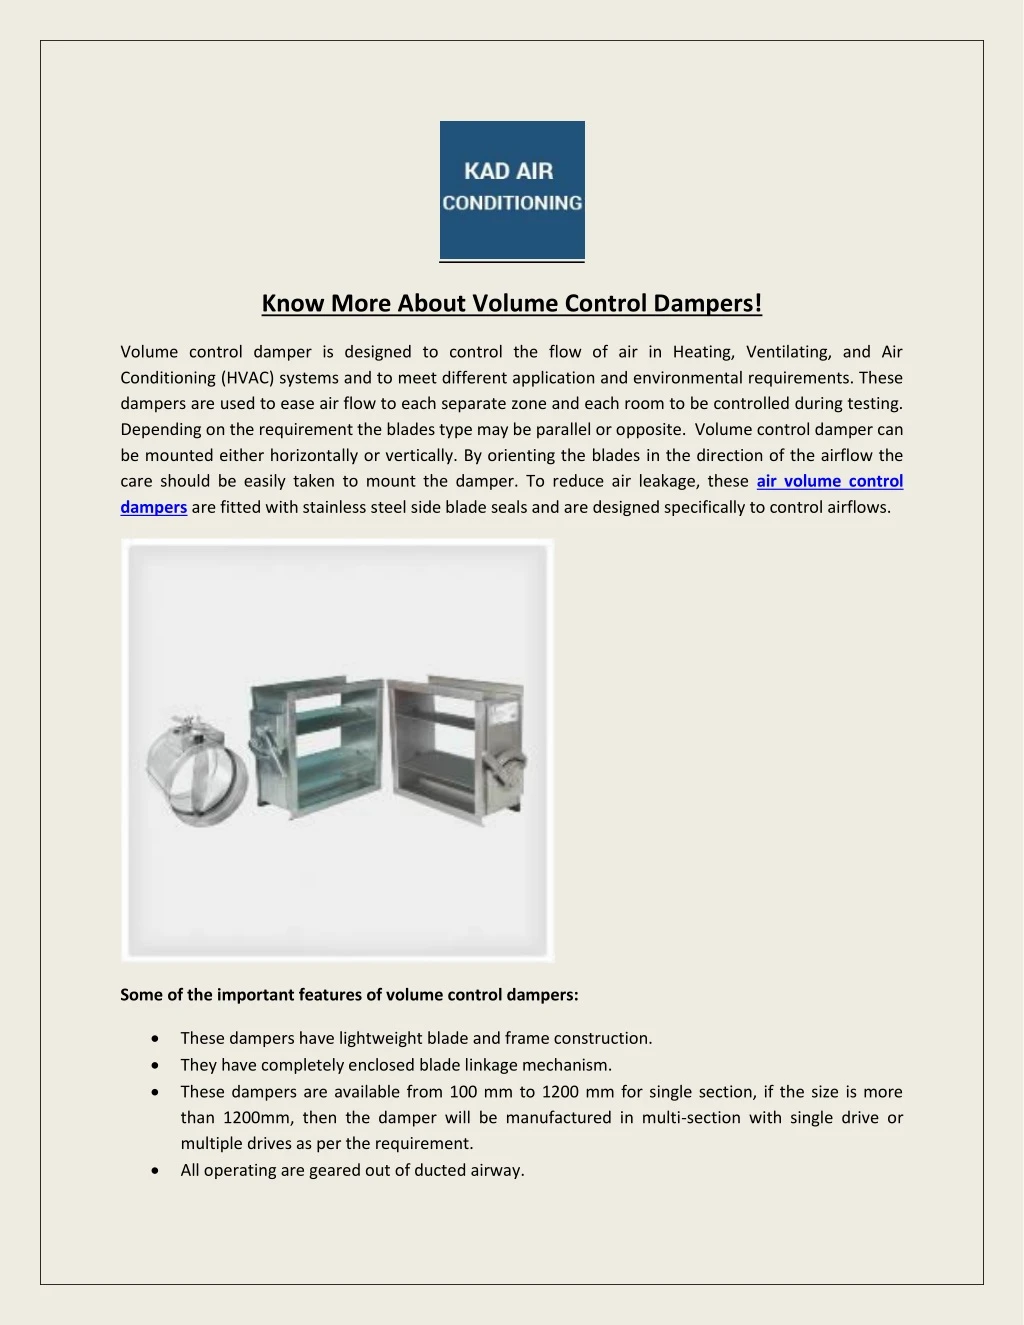 know more about volume control dampers